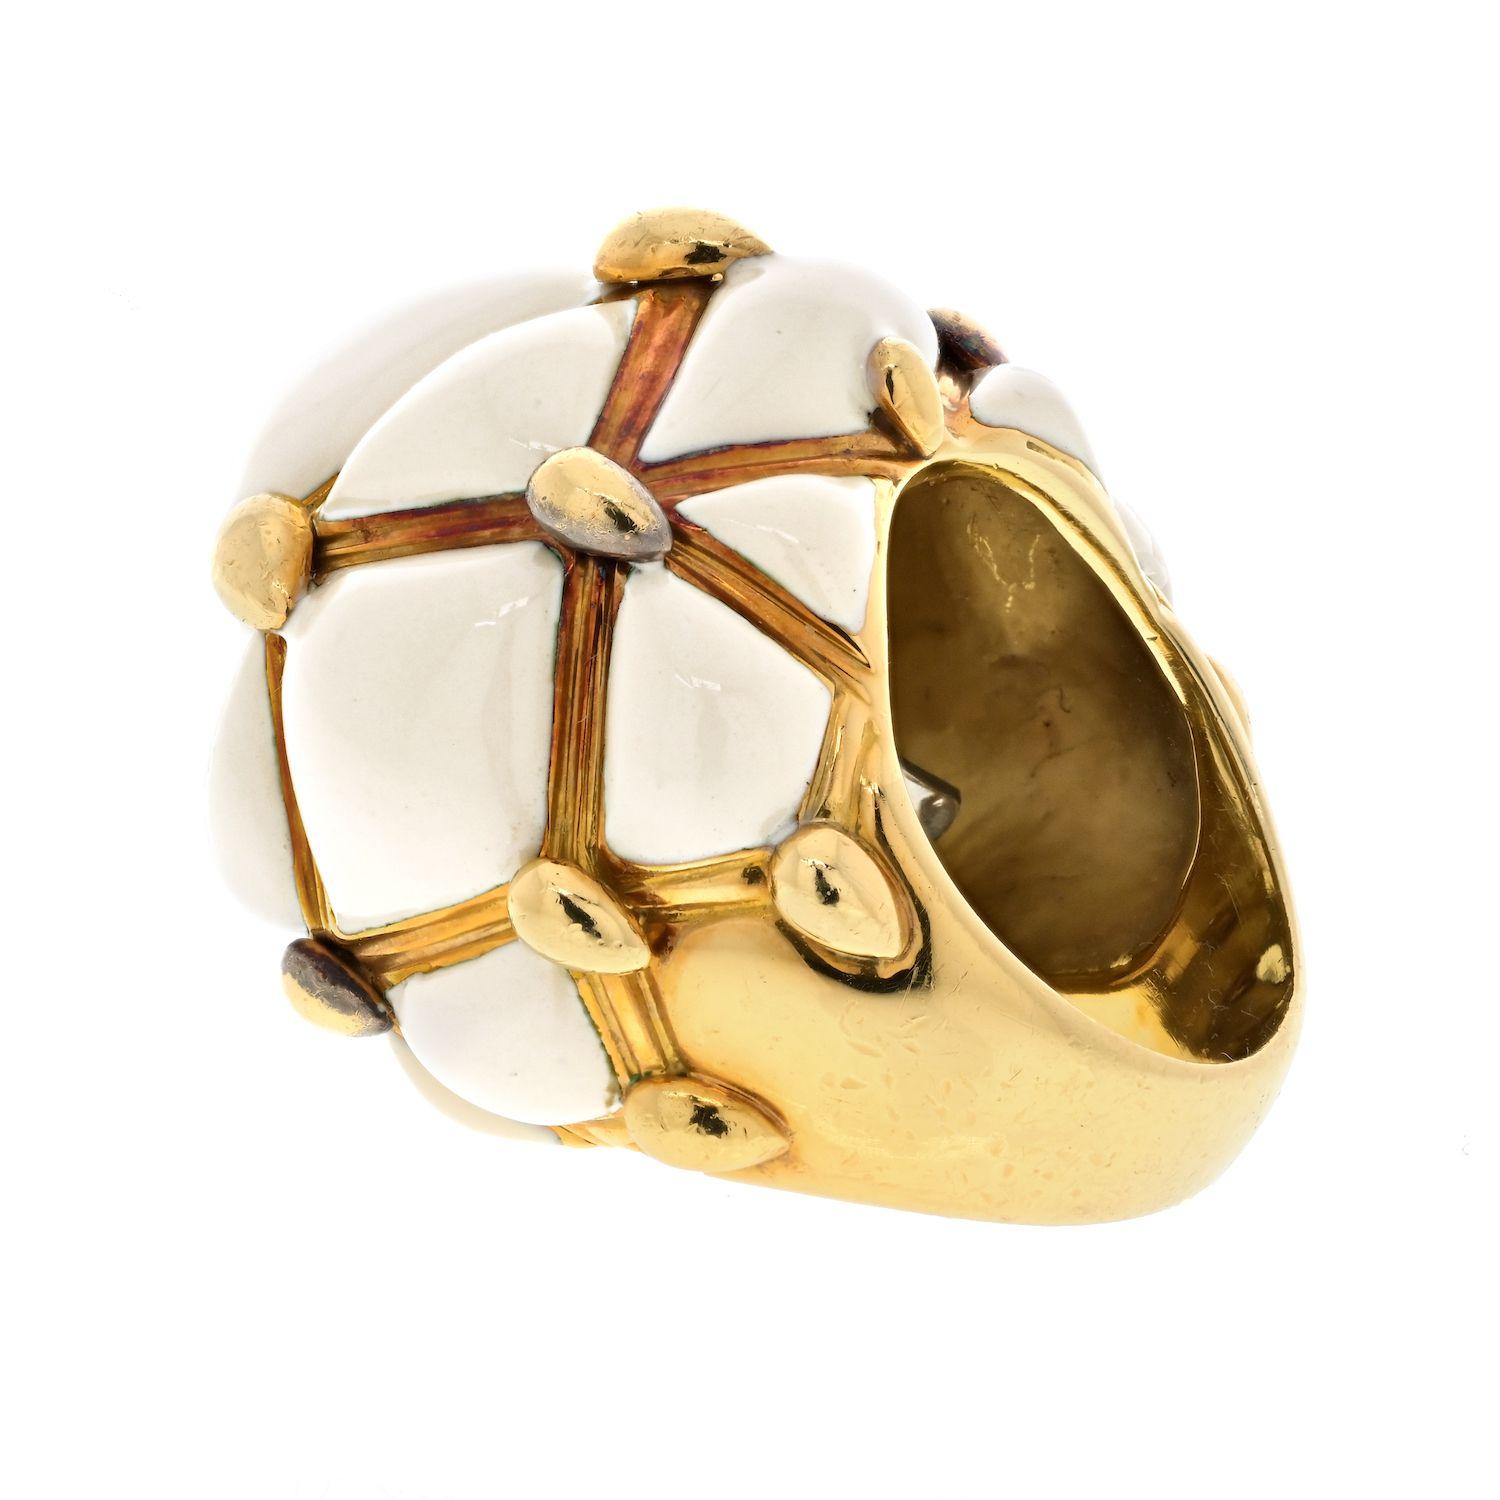 Make a bold statement with the David Webb Geodesic Patterned Domed Cocktail Ring. This exquisite piece is crafted in 18k yellow gold, showcasing the brand's commitment to exceptional quality and design. The ring features a captivating geodesic